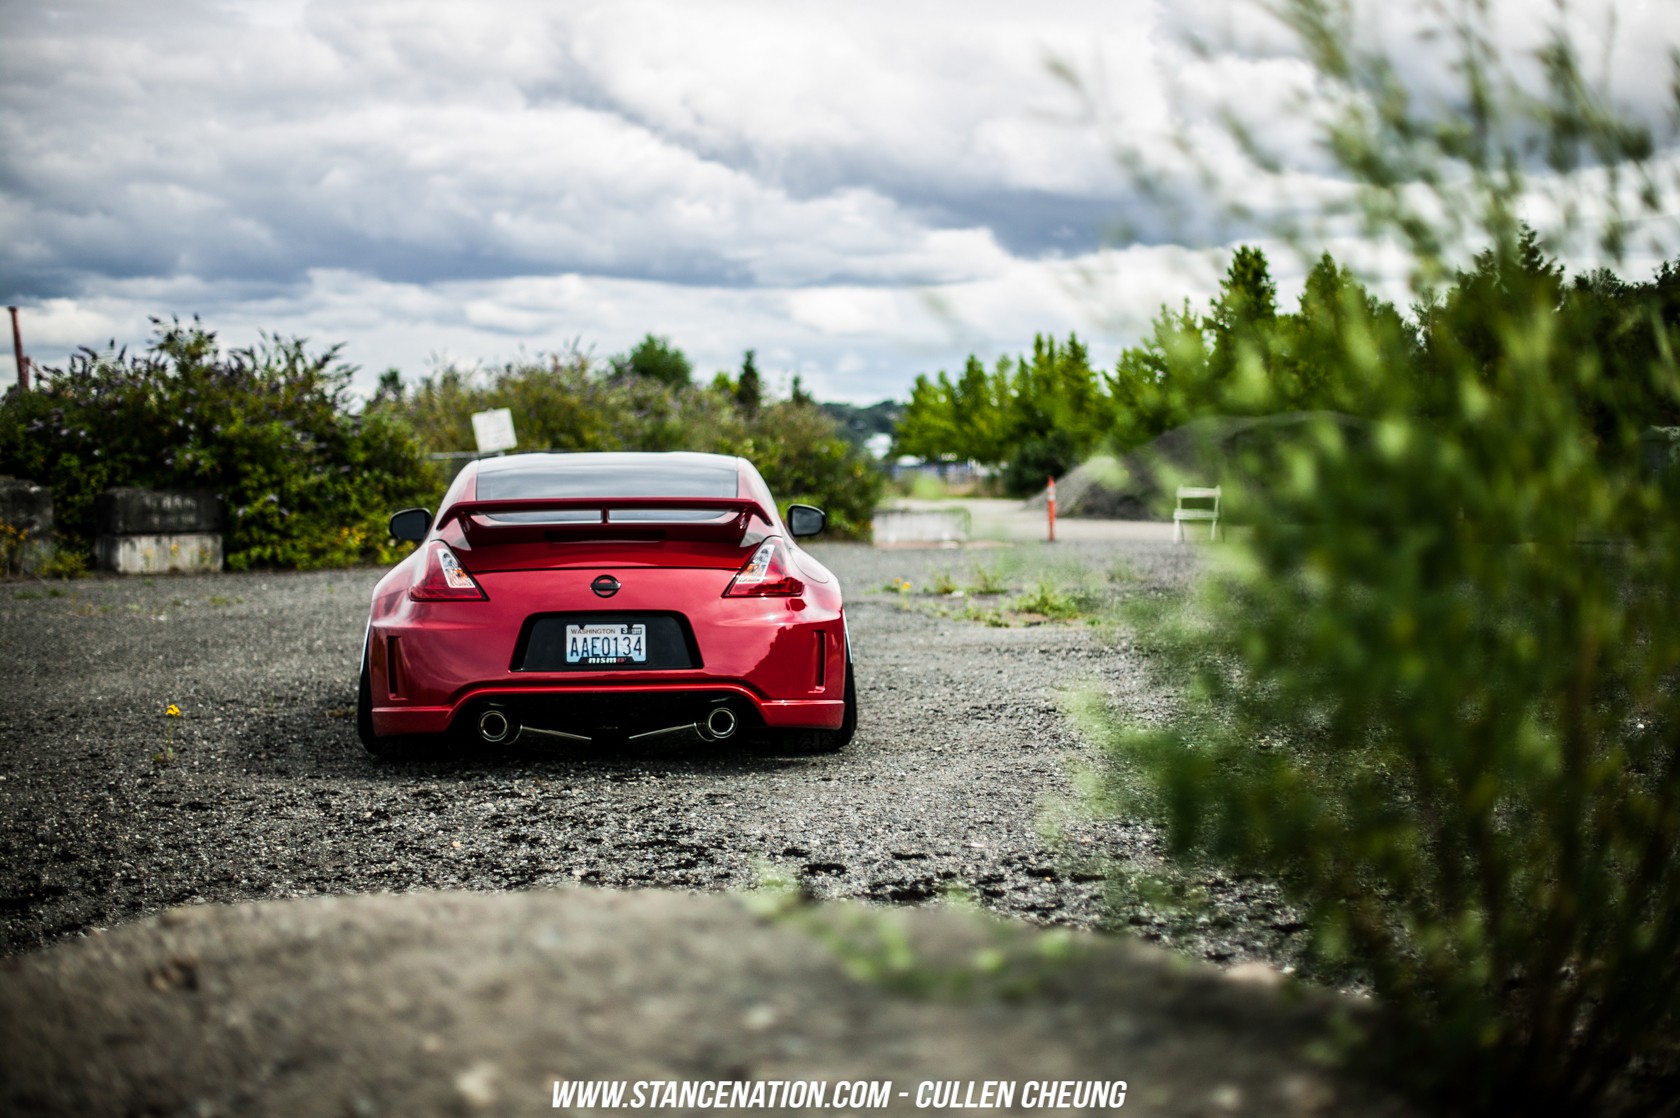 General 1680x1118 red cars car StanceNation vehicle numbers rear view Nissan Fairlady Z Nissan 370Z Nissan